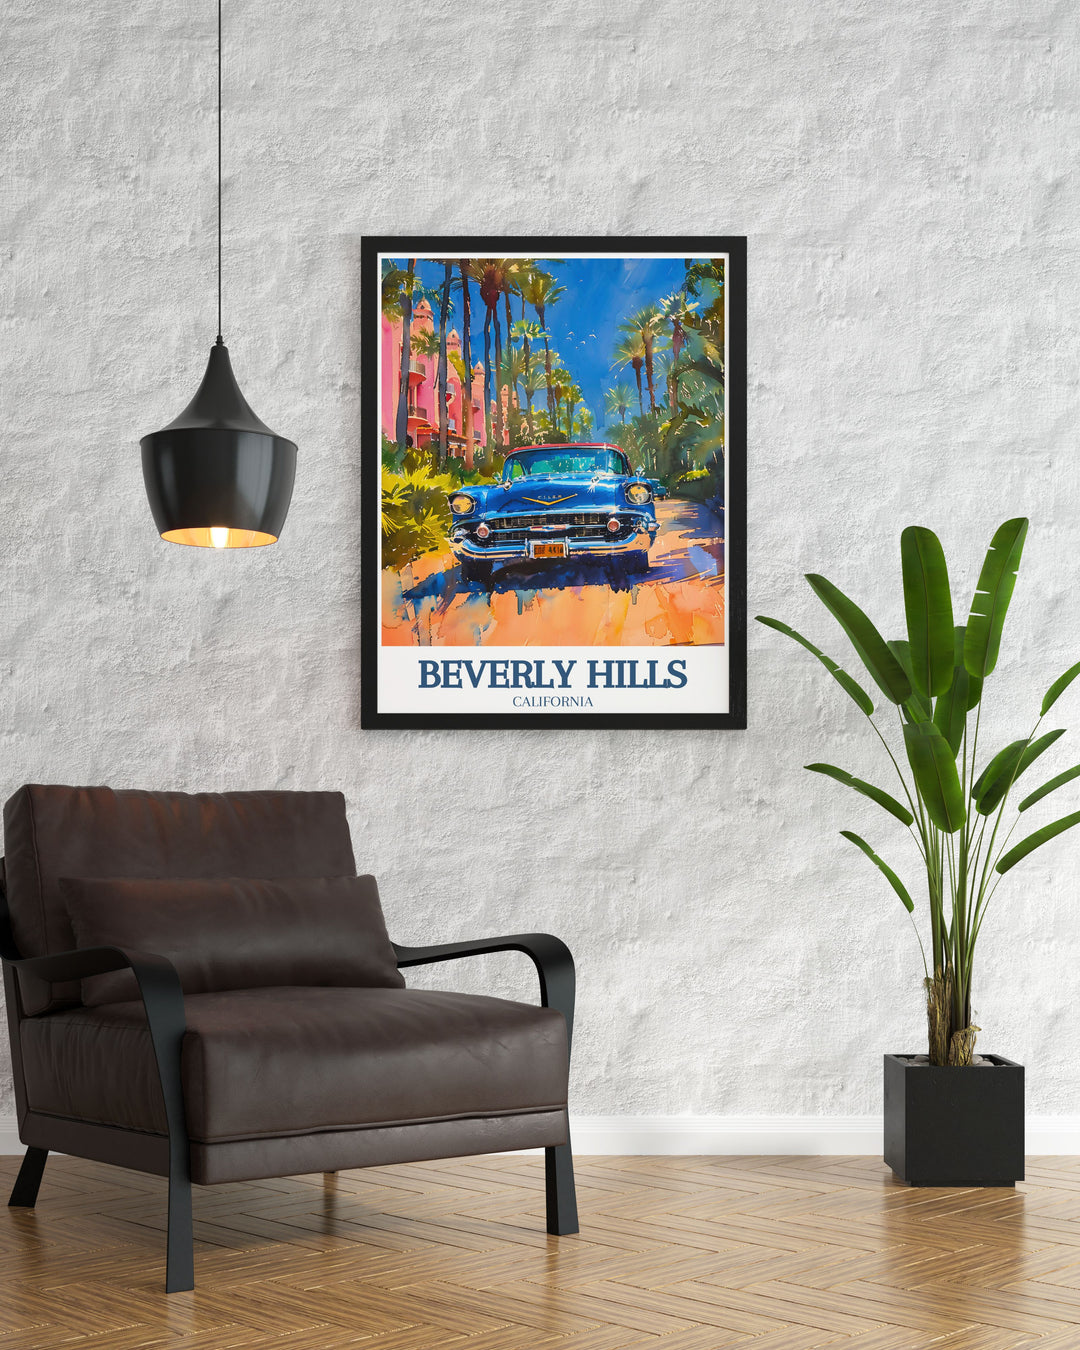 Elegant California wall art depicting the Beverly Hills Hotel and Hollywood, showcasing the states iconic landmarks and glamorous atmosphere. Perfect for adding sophistication and a touch of Hollywood magic to any room.